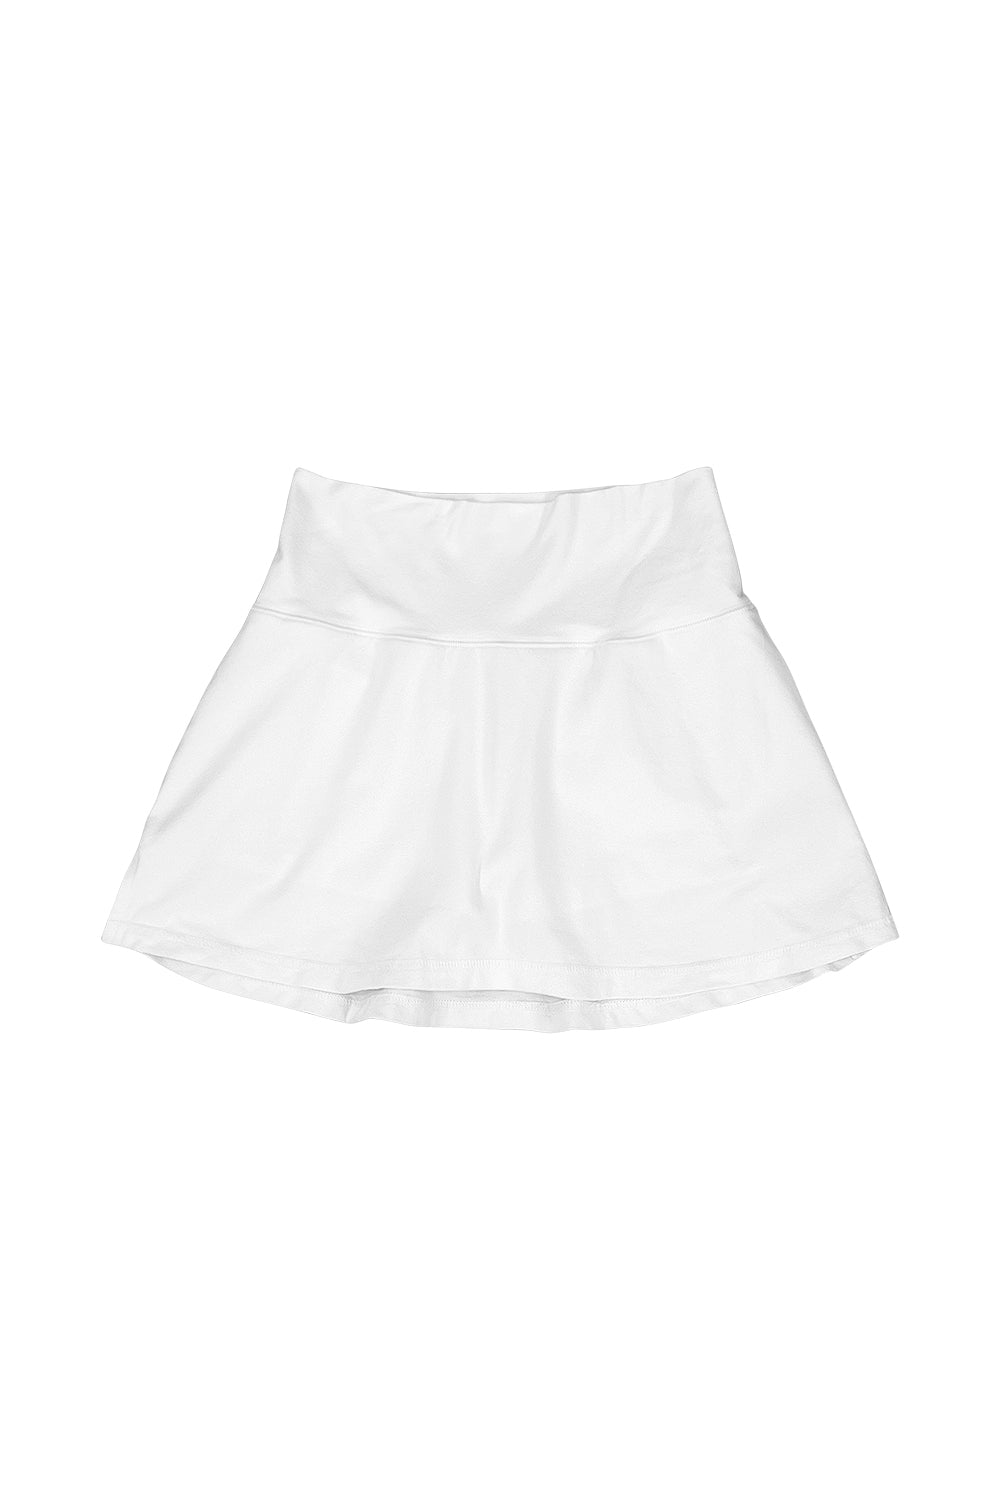 Court Skort | Jungmaven Hemp Clothing & Accessories / Color: Washed White